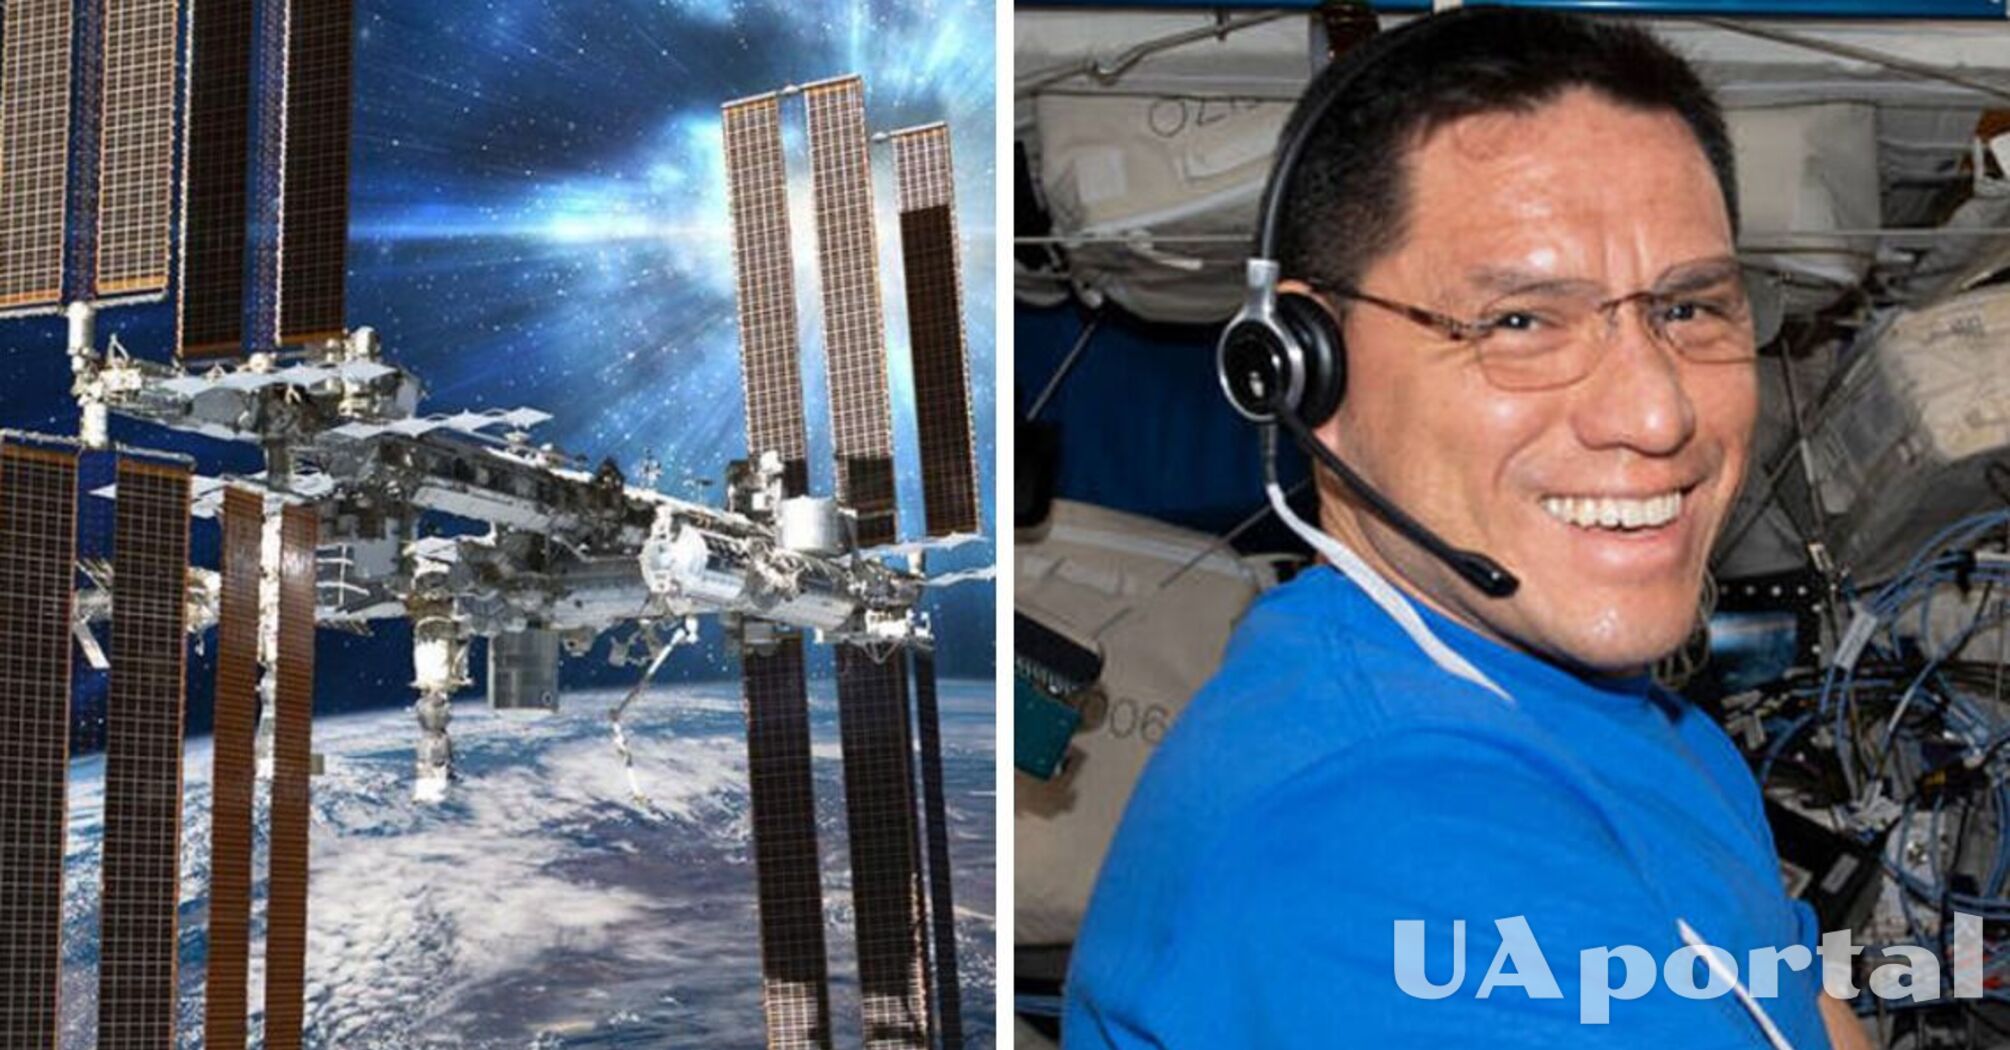 American astronaut Frank Rubio broke NASA's record for the longest solo mission into space